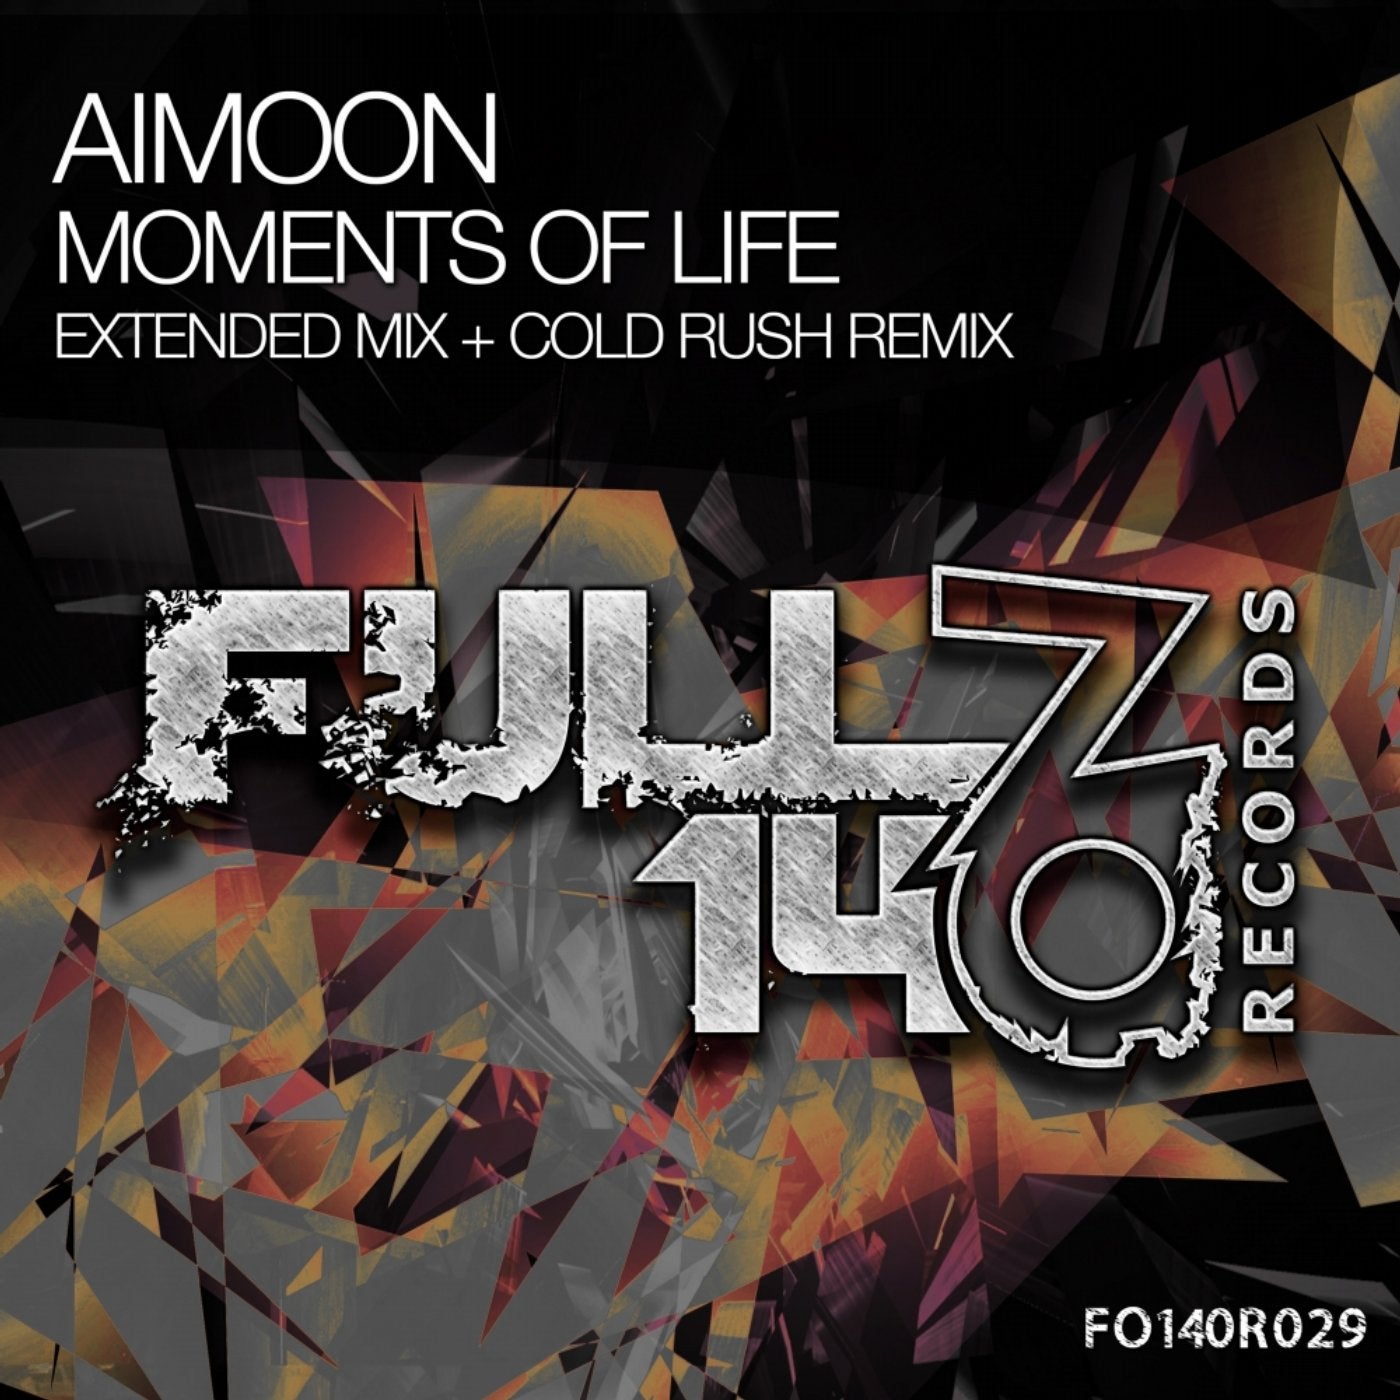 Life is cold. Rush Extended Mix. Life moments альбом. Aimoon. Cold Rush - Challenger [Original Mix].